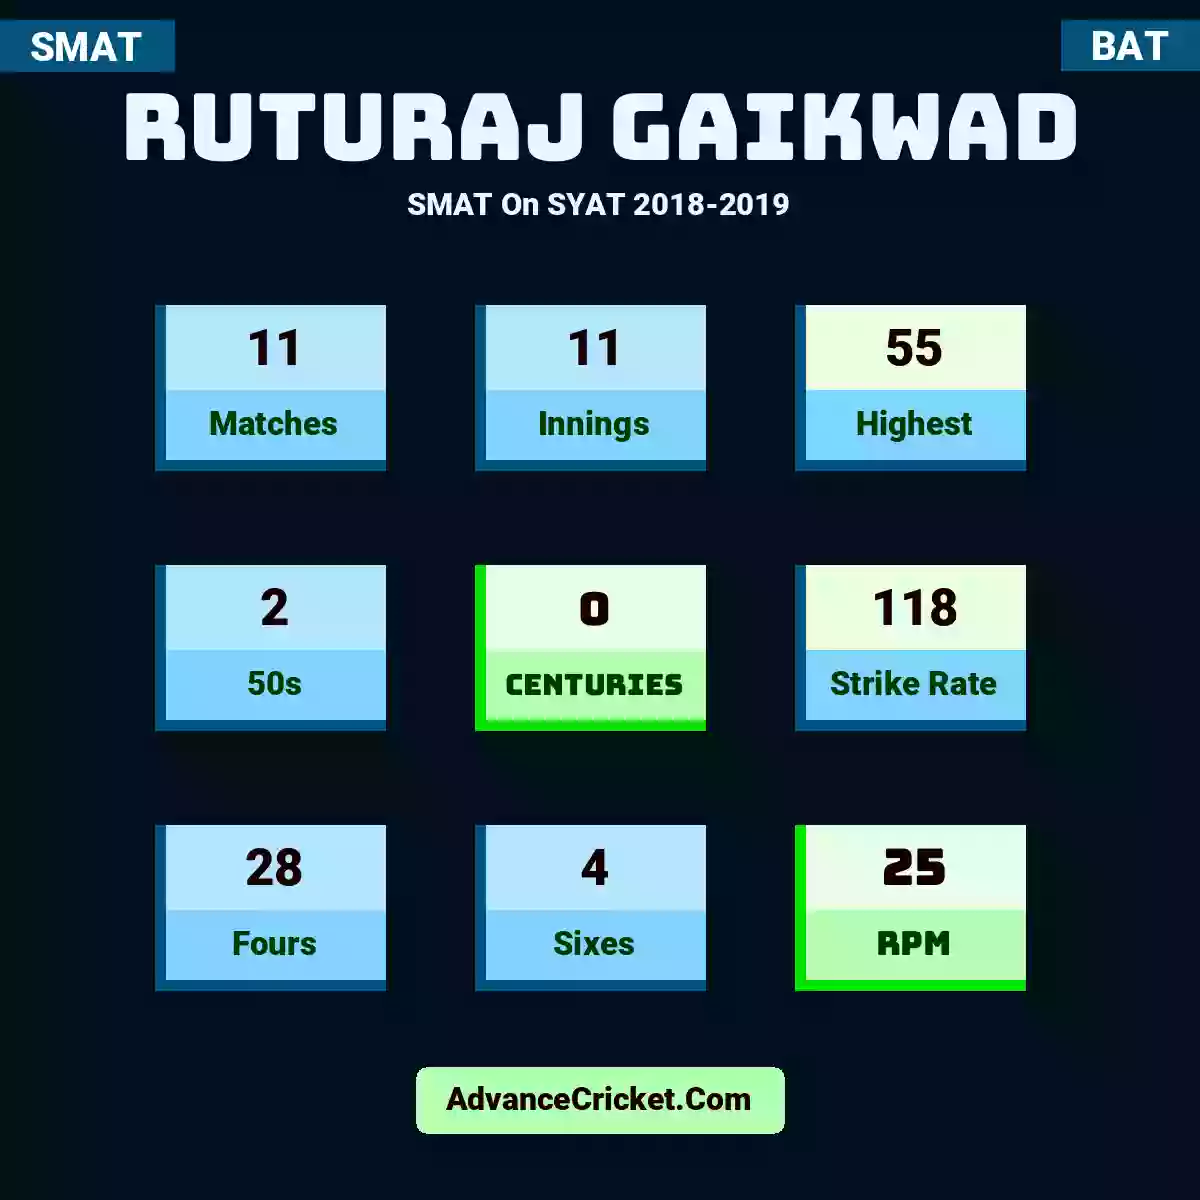 Ruturaj Gaikwad SMAT  On SYAT 2018-2019, Ruturaj Gaikwad played 11 matches, scored 55 runs as highest, 2 half-centuries, and 0 centuries, with a strike rate of 118. R.Gaikwad hit 28 fours and 4 sixes, with an RPM of 25.